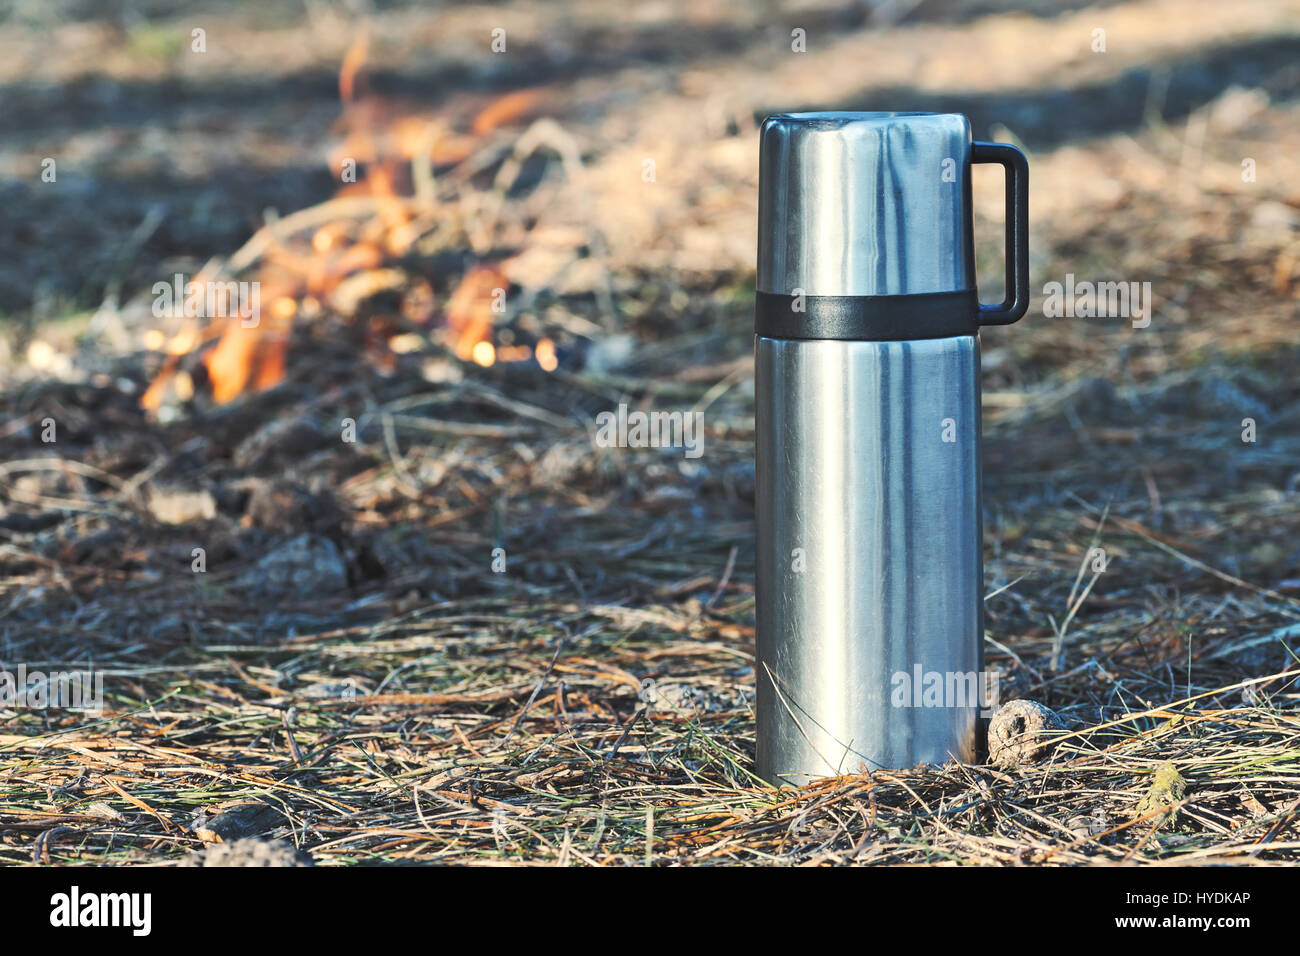 https://c8.alamy.com/comp/HYDKAP/closeup-photo-of-thermos-bottle-and-cup-or-mug-with-coffee-tea-or-HYDKAP.jpg